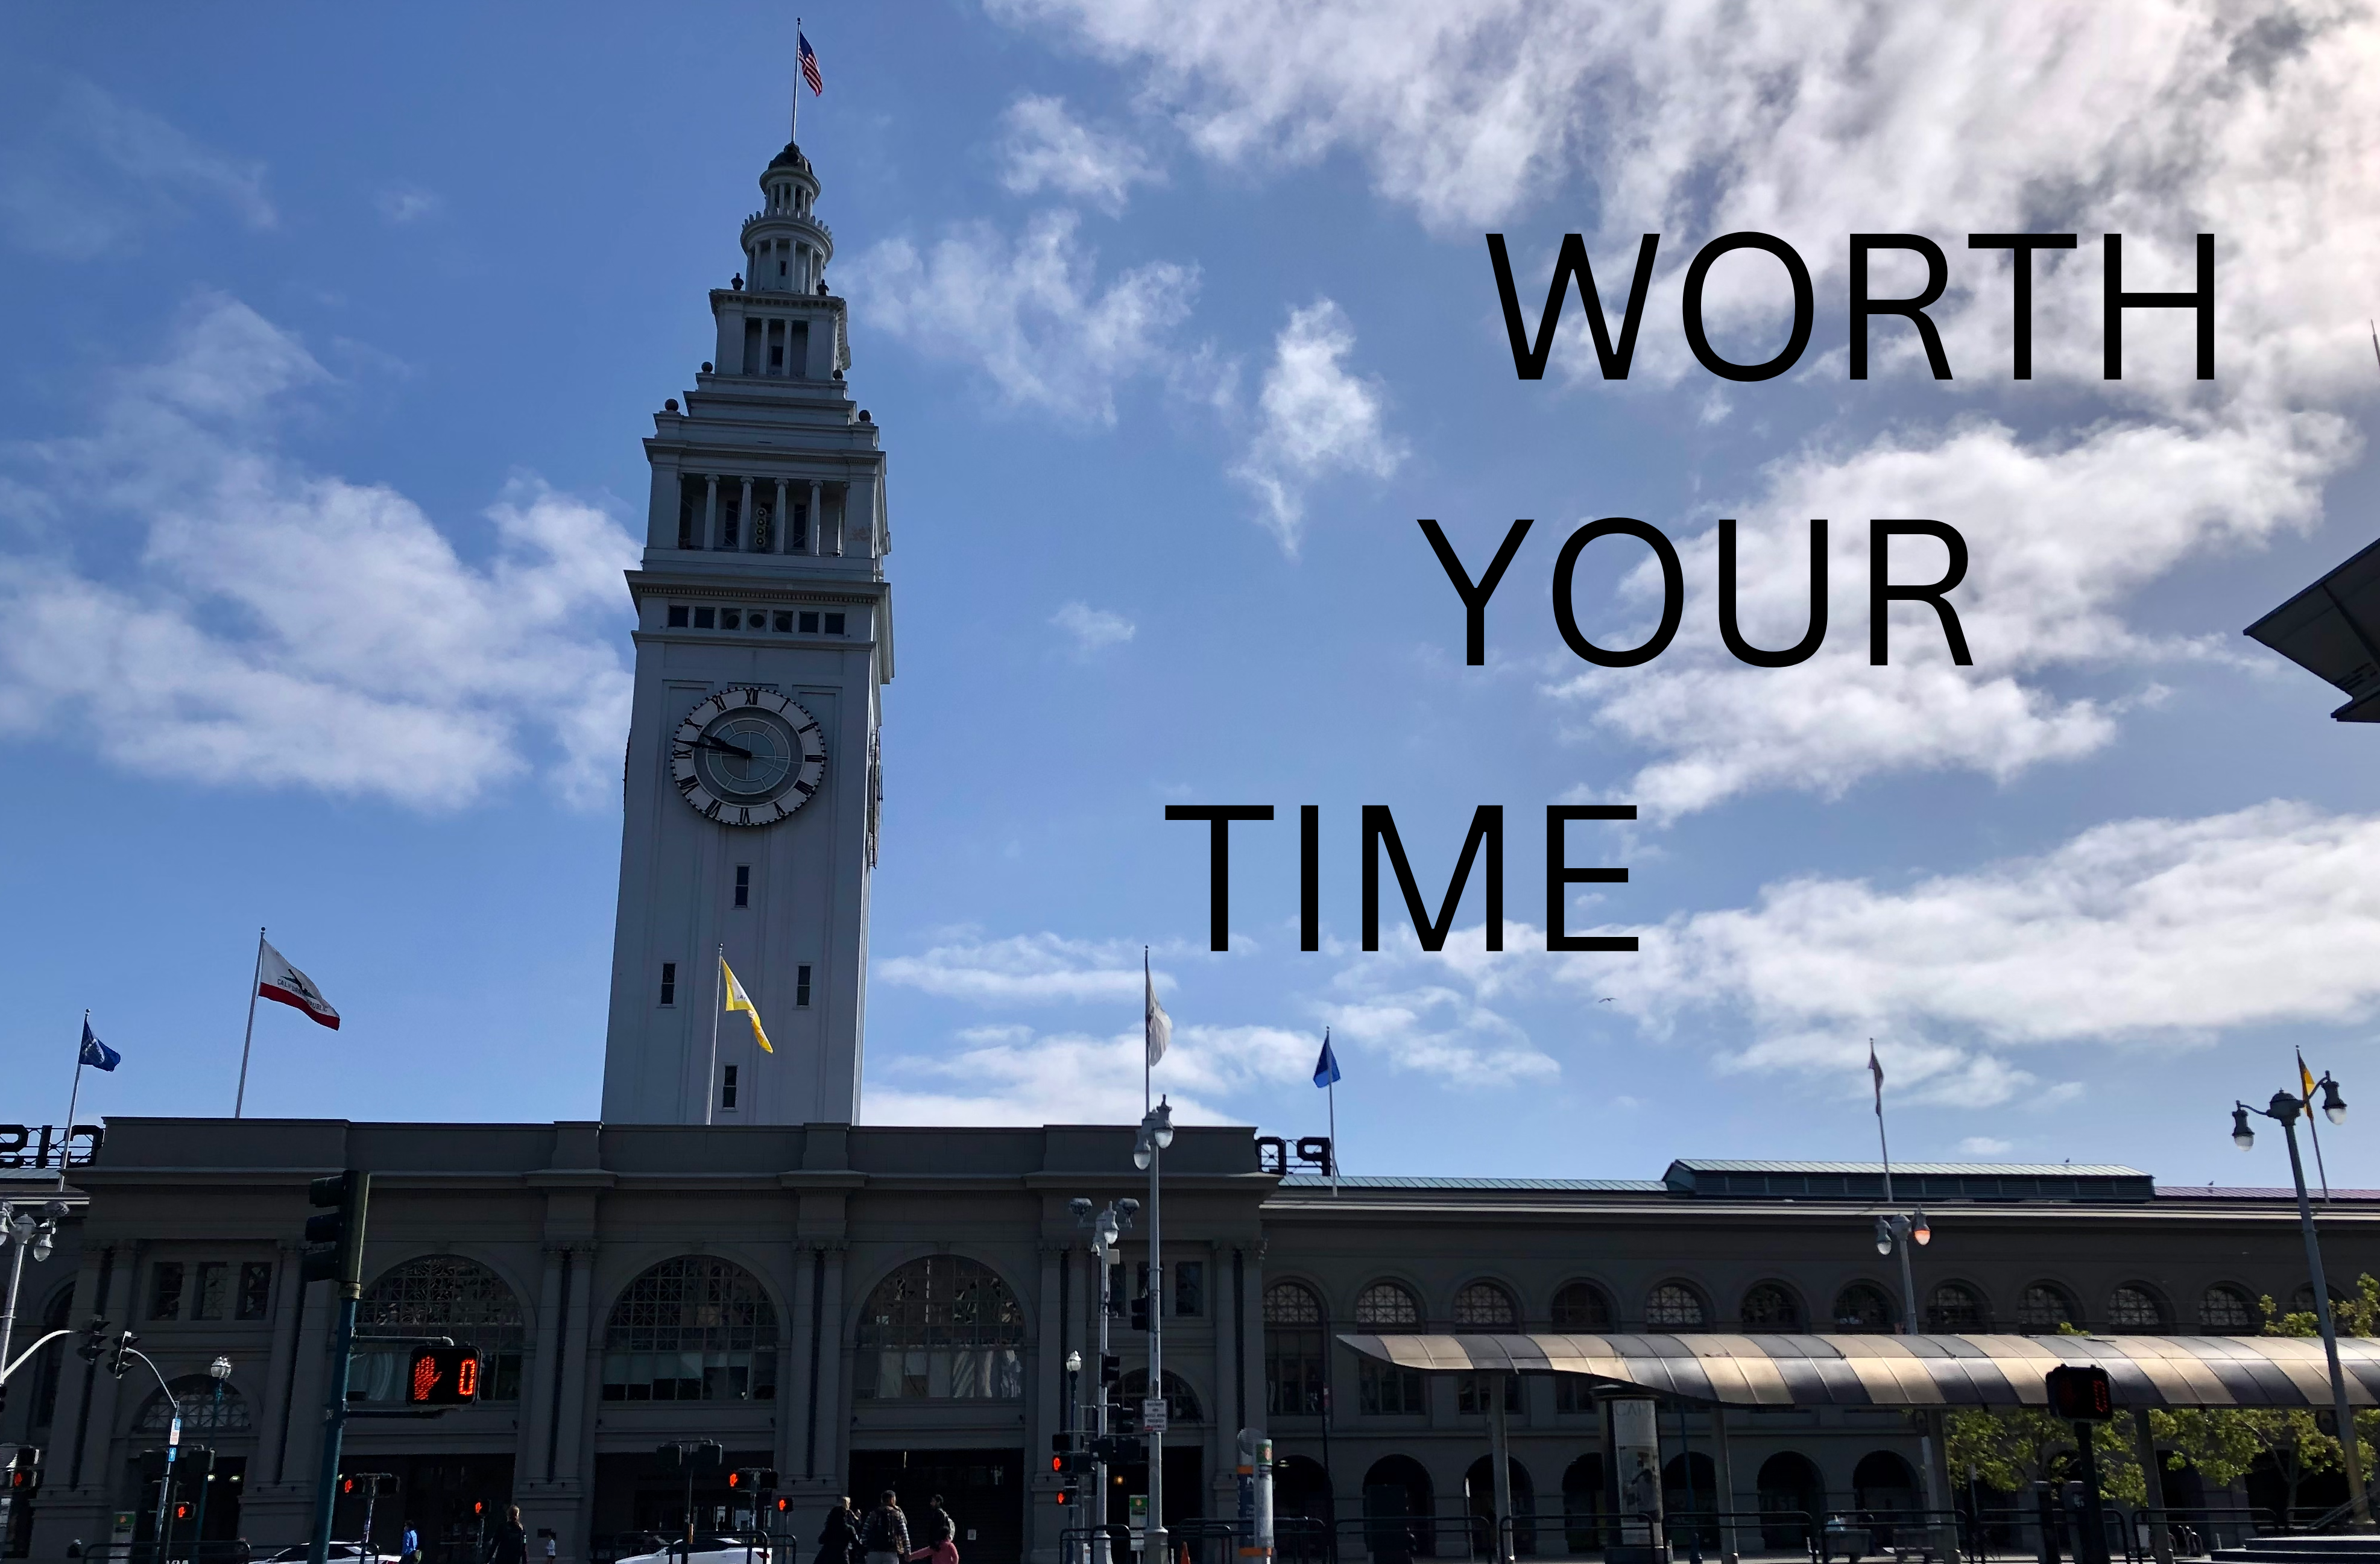 clock tower with title "WORTH YOUR TIME"